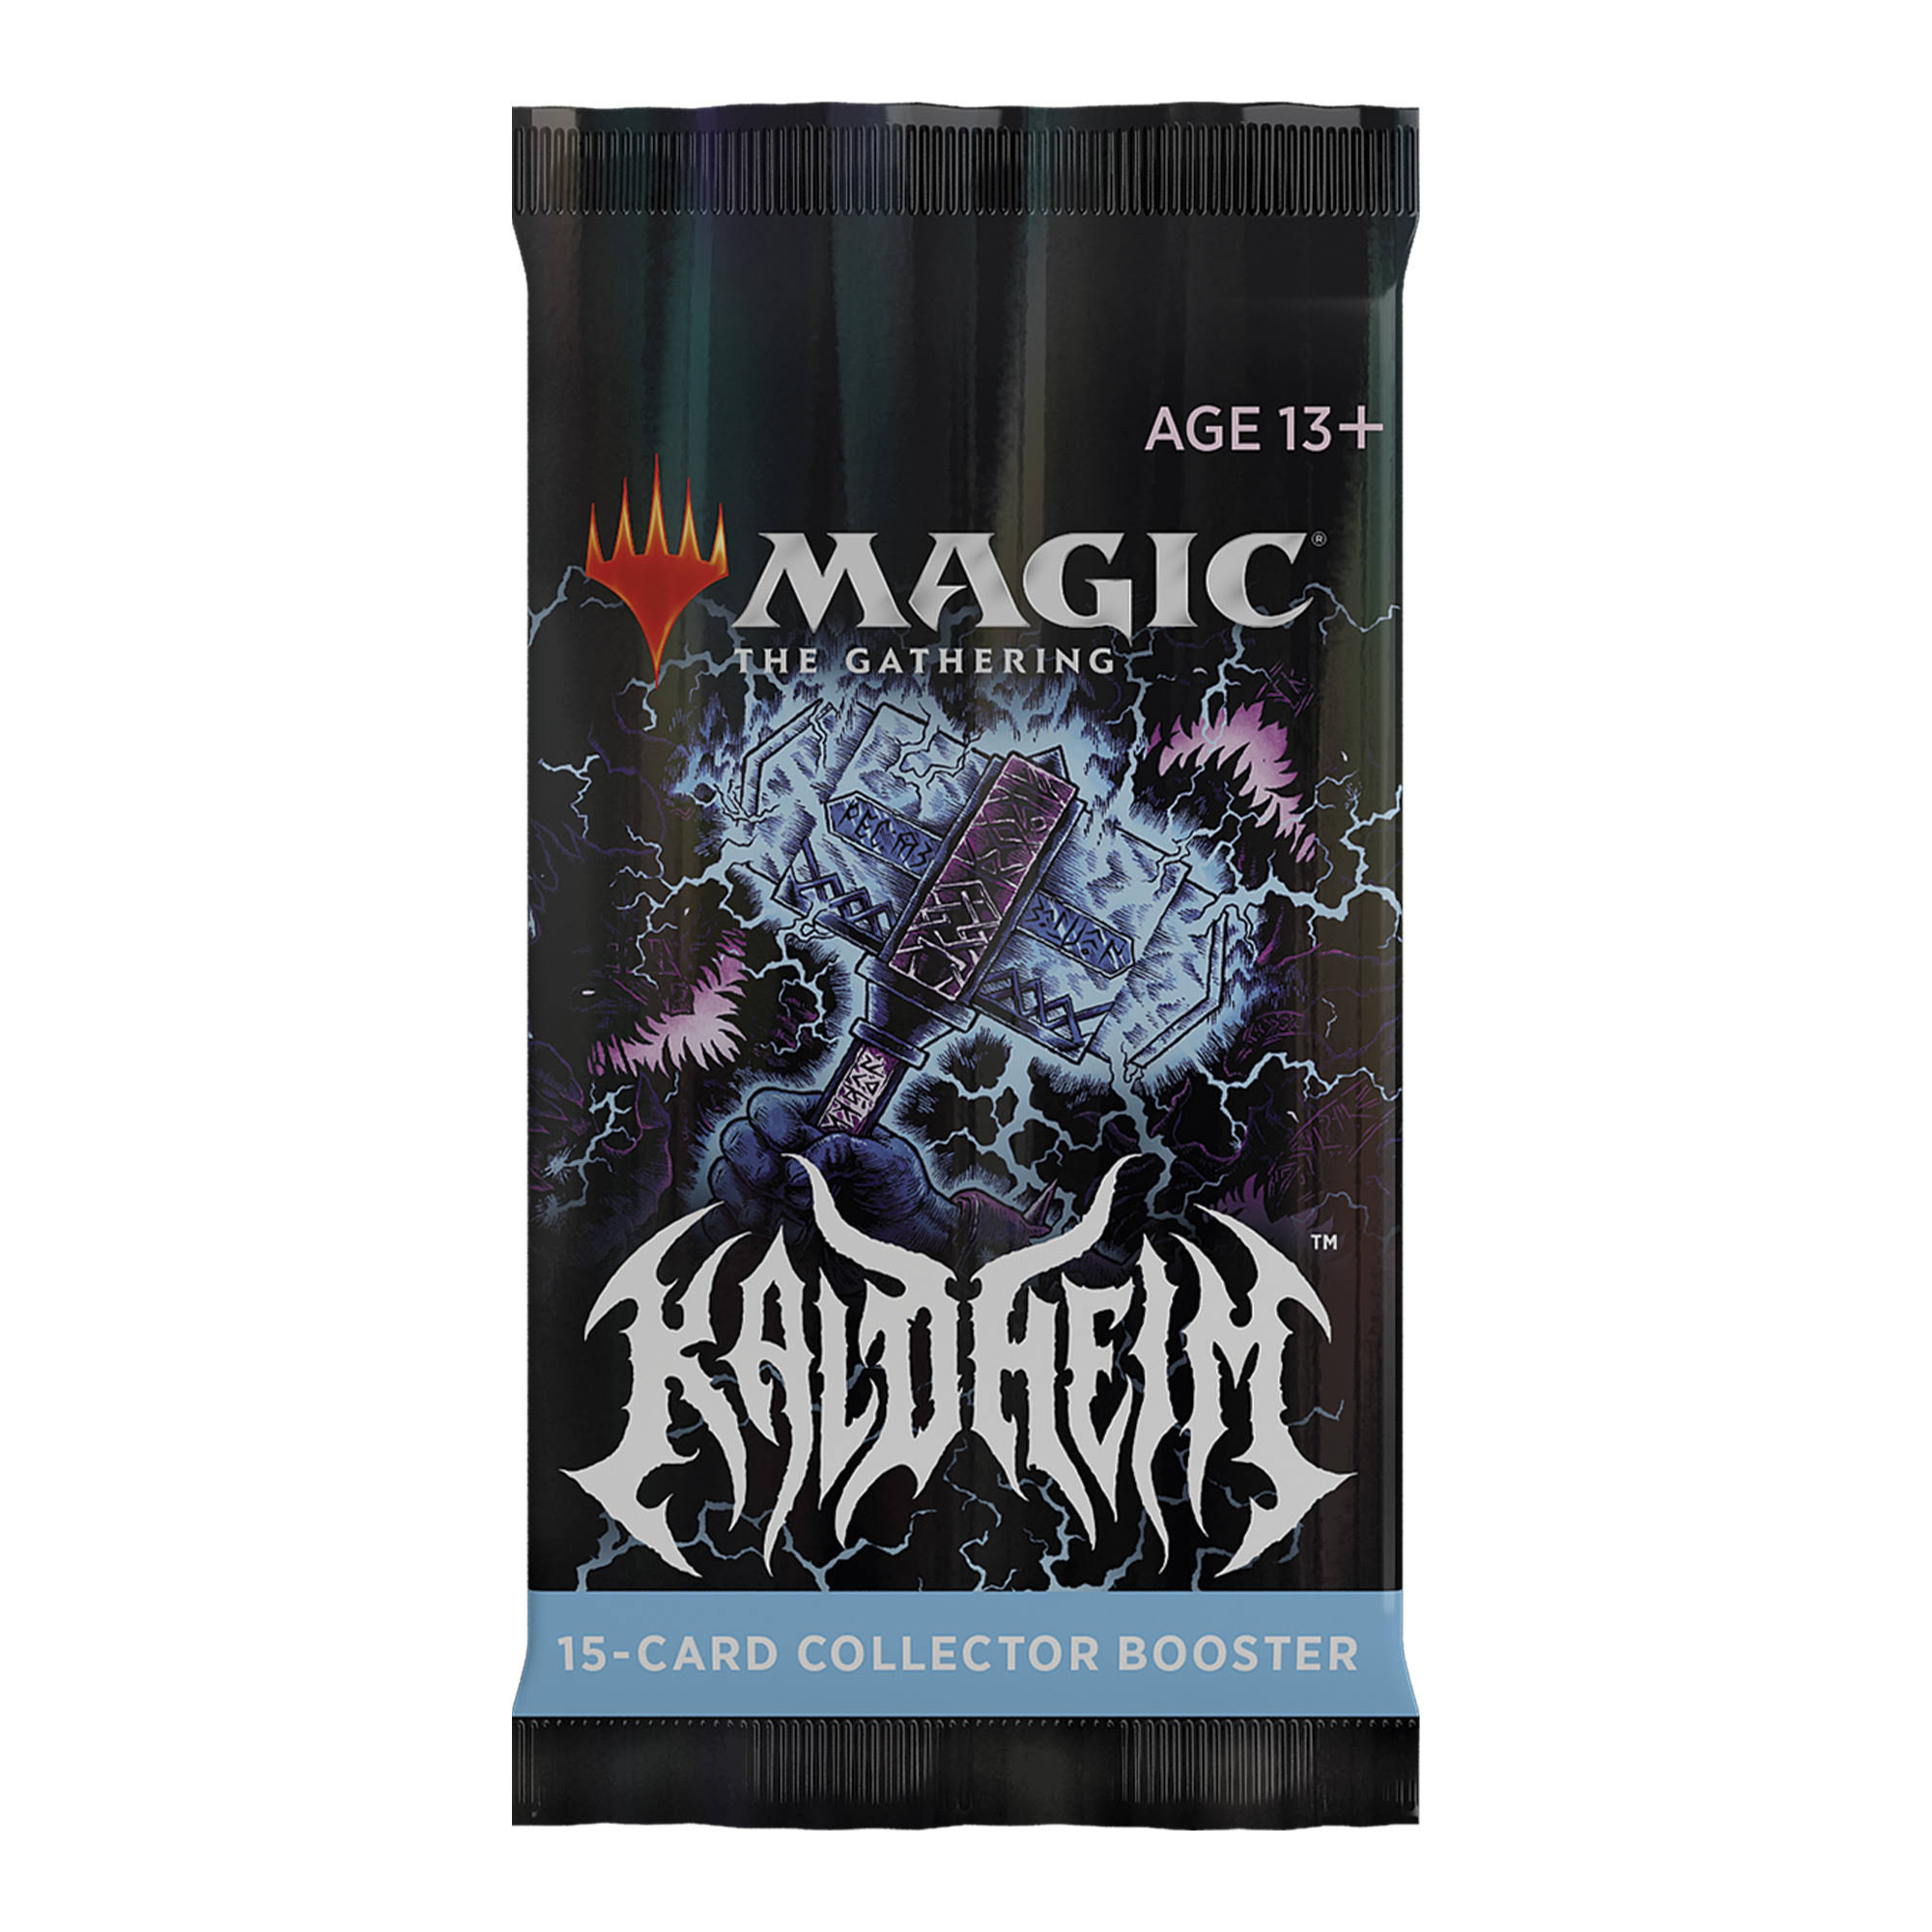 Magic THE GATHERING KALDHEIM COLLECTOR BOOSTER DISPLAY (PACK OF 12)